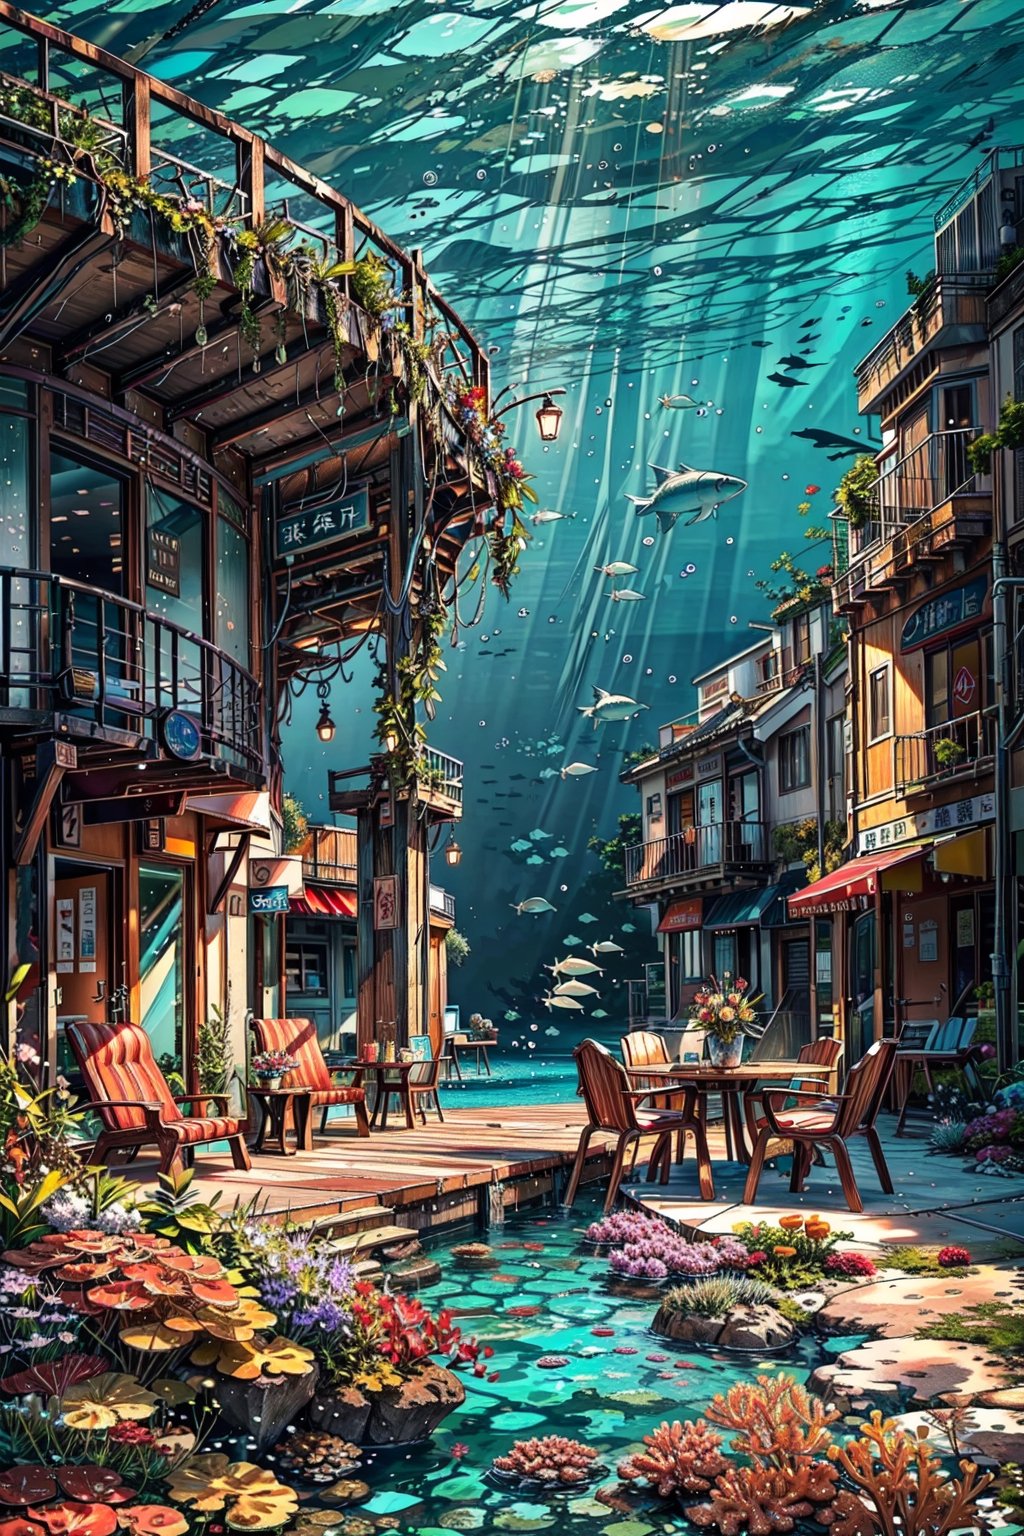 This is a scene, a masterpiece, a perfect performance. This is a hotel under the sea. There are several bunk beds on the sea floor, giving full play to the elements of the hotel. Dining tables, dining chairs, pearls, corals and gems are dotted with underwater towns. It is very layered, with details hidden everywhere. Jellyfish, schools of fish, and aquatic creatures swim freely in elegant life. Many corals and sea anemones are like gardens in the water. It is an impressive picture.